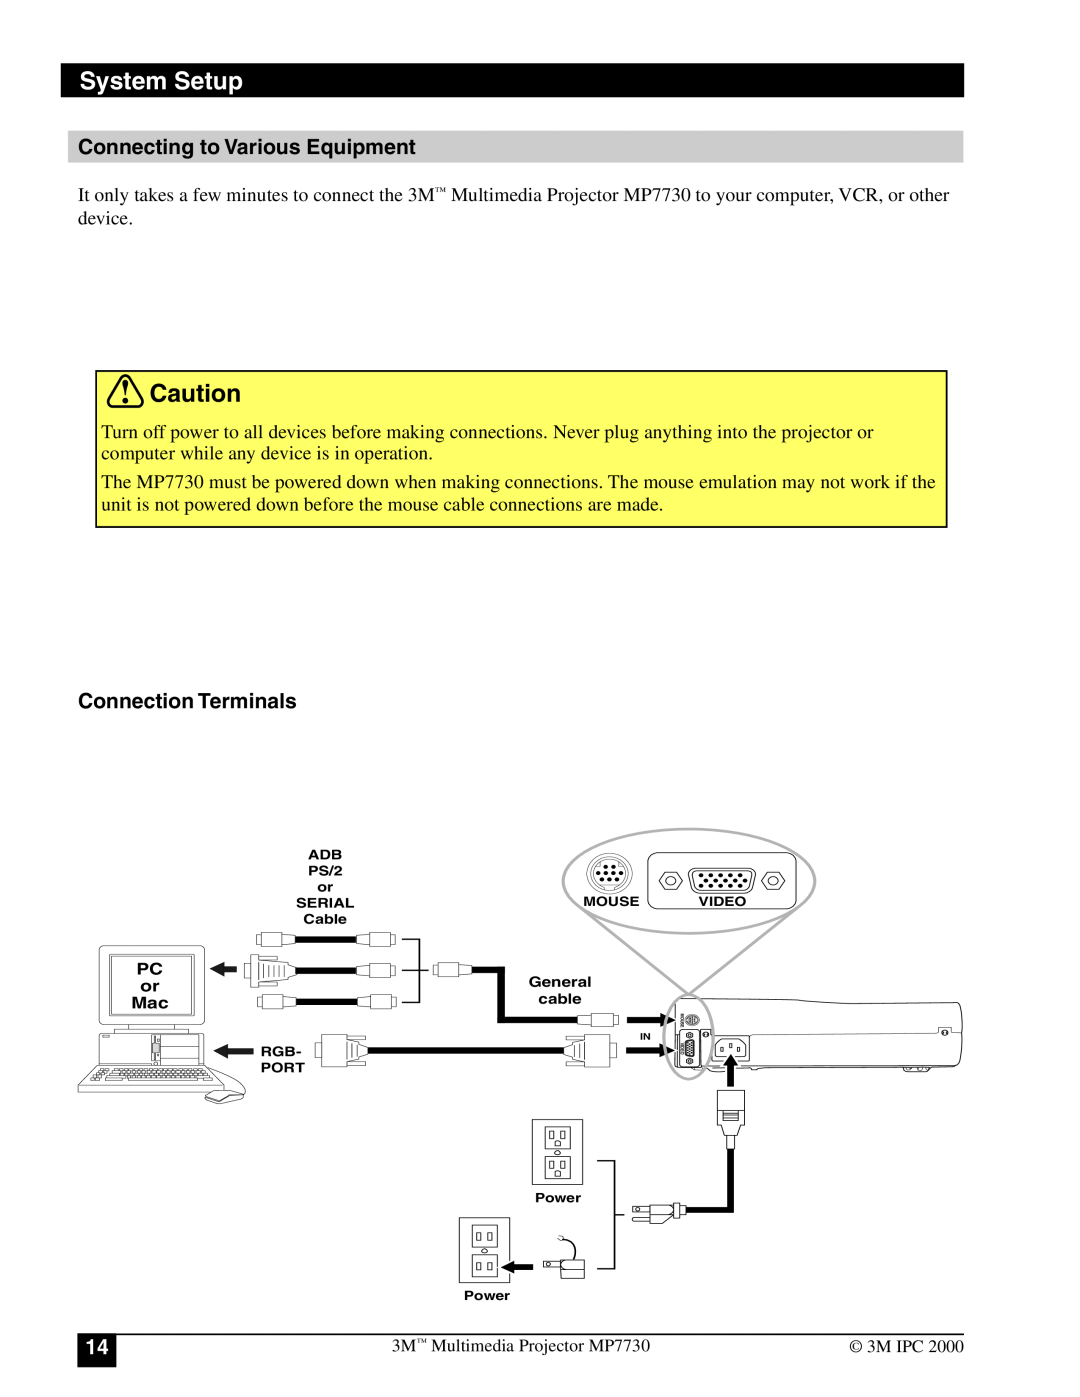 3M MP7730 manual Connecting to Various Equipment, Connection Terminals, System Setup, PC or Mac 